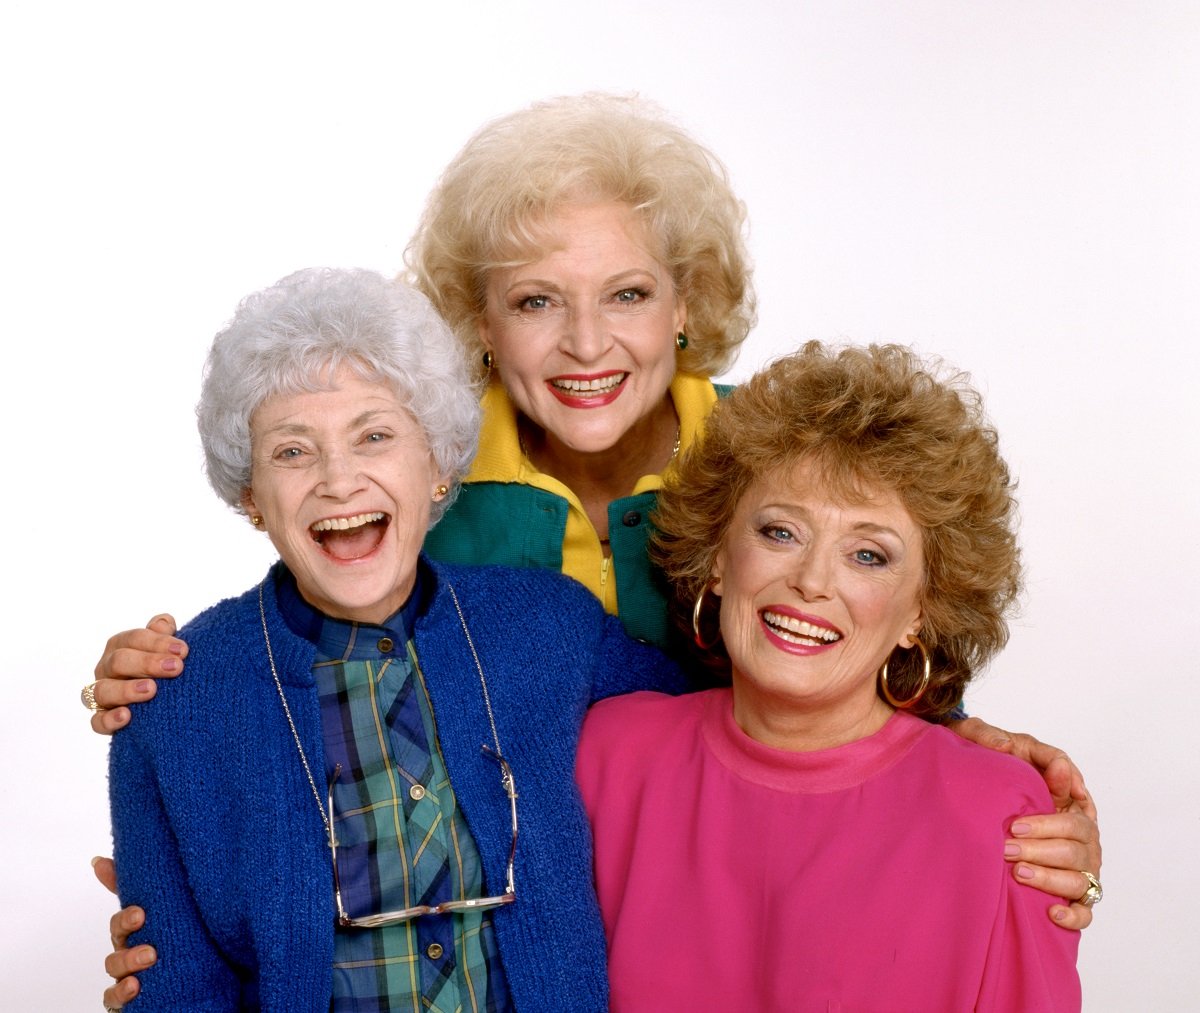 'The Golden Girls' actor Estelle Getty in a blue dress, Betty White in green and yellow outfit, and Rue McClanahan in a pink sweater; pose in front of a white backdrop.